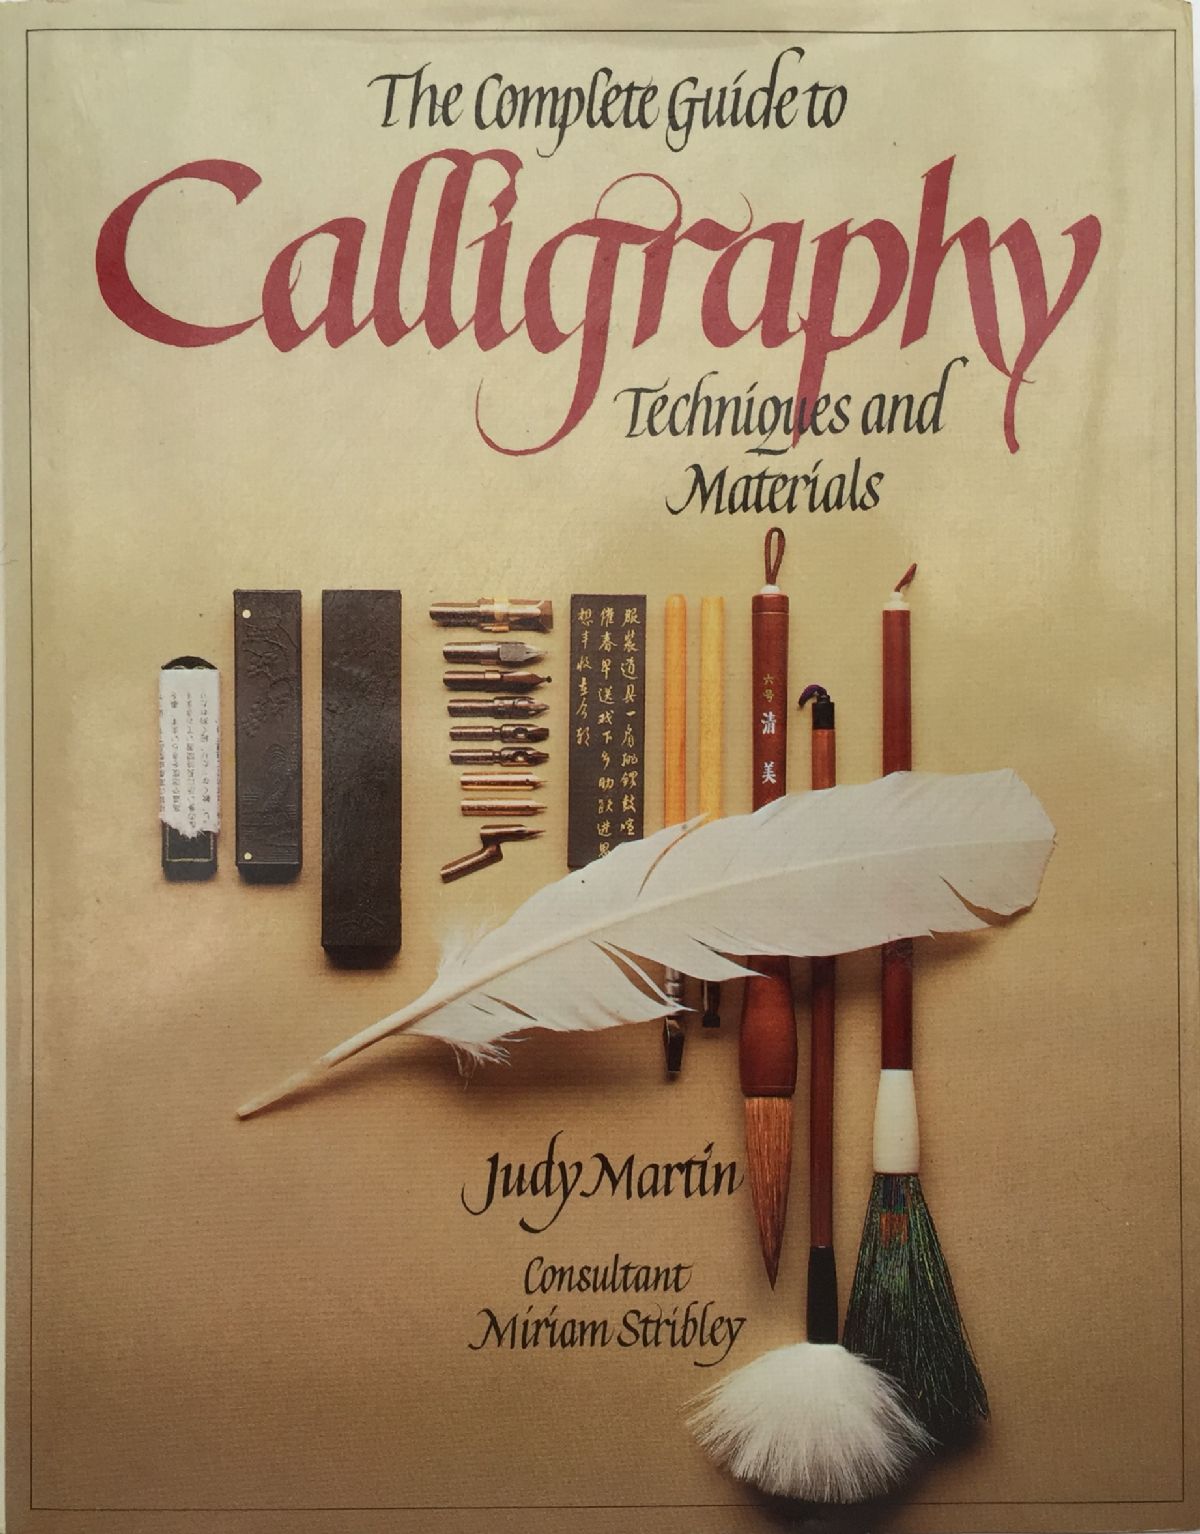 THE COMPLETE GUIDE TO CALLIGRAPHY: Techniques and Materials